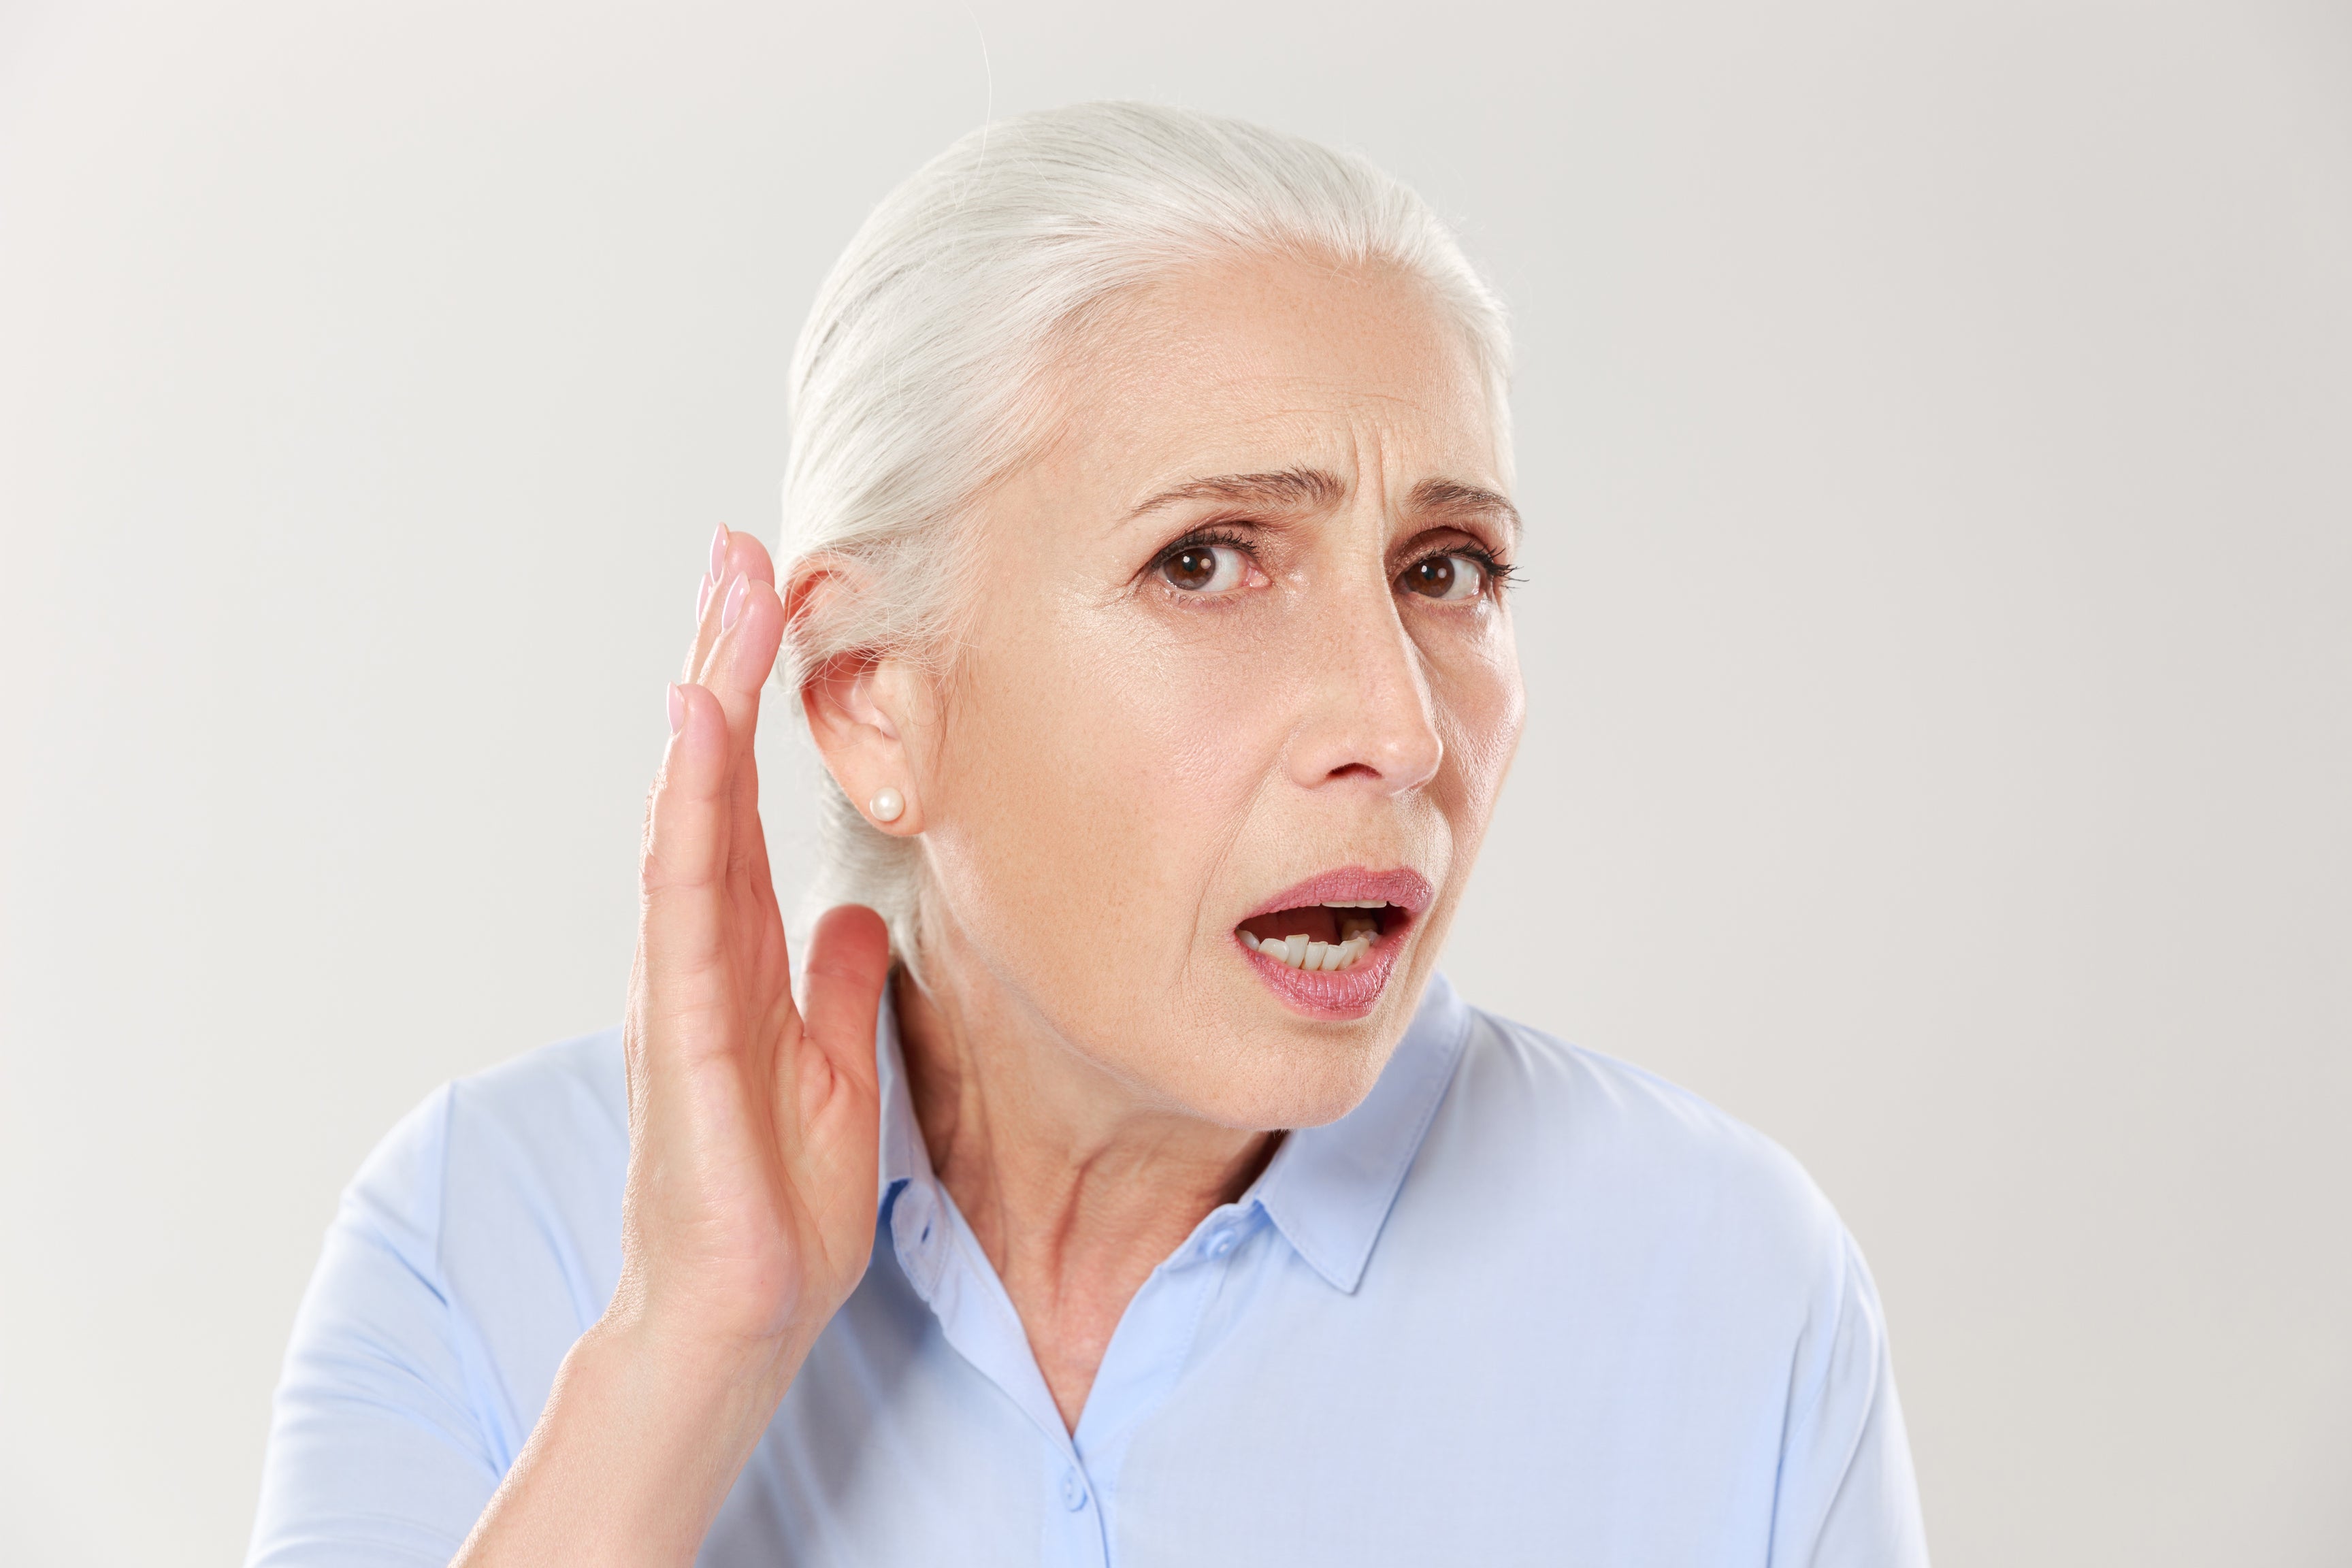 Best 4 hearing aid accessories for beginners